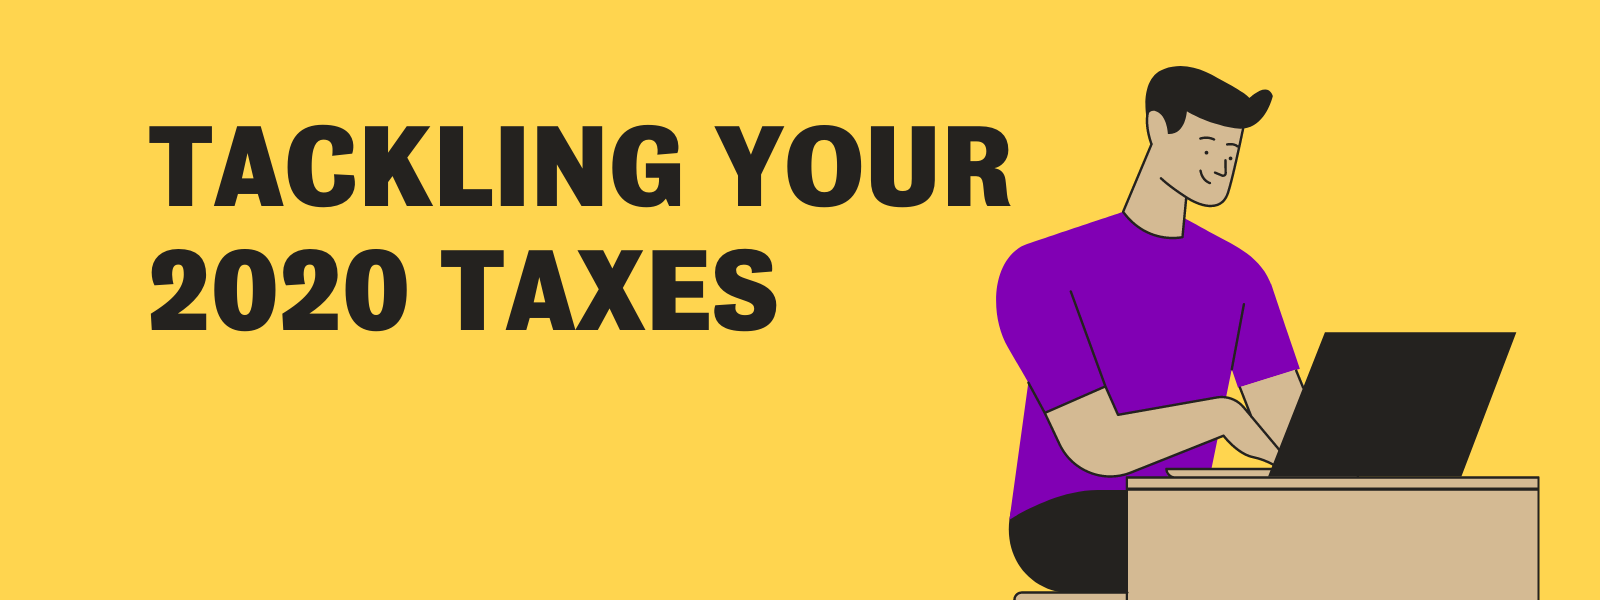 Tackling your 2020 taxees